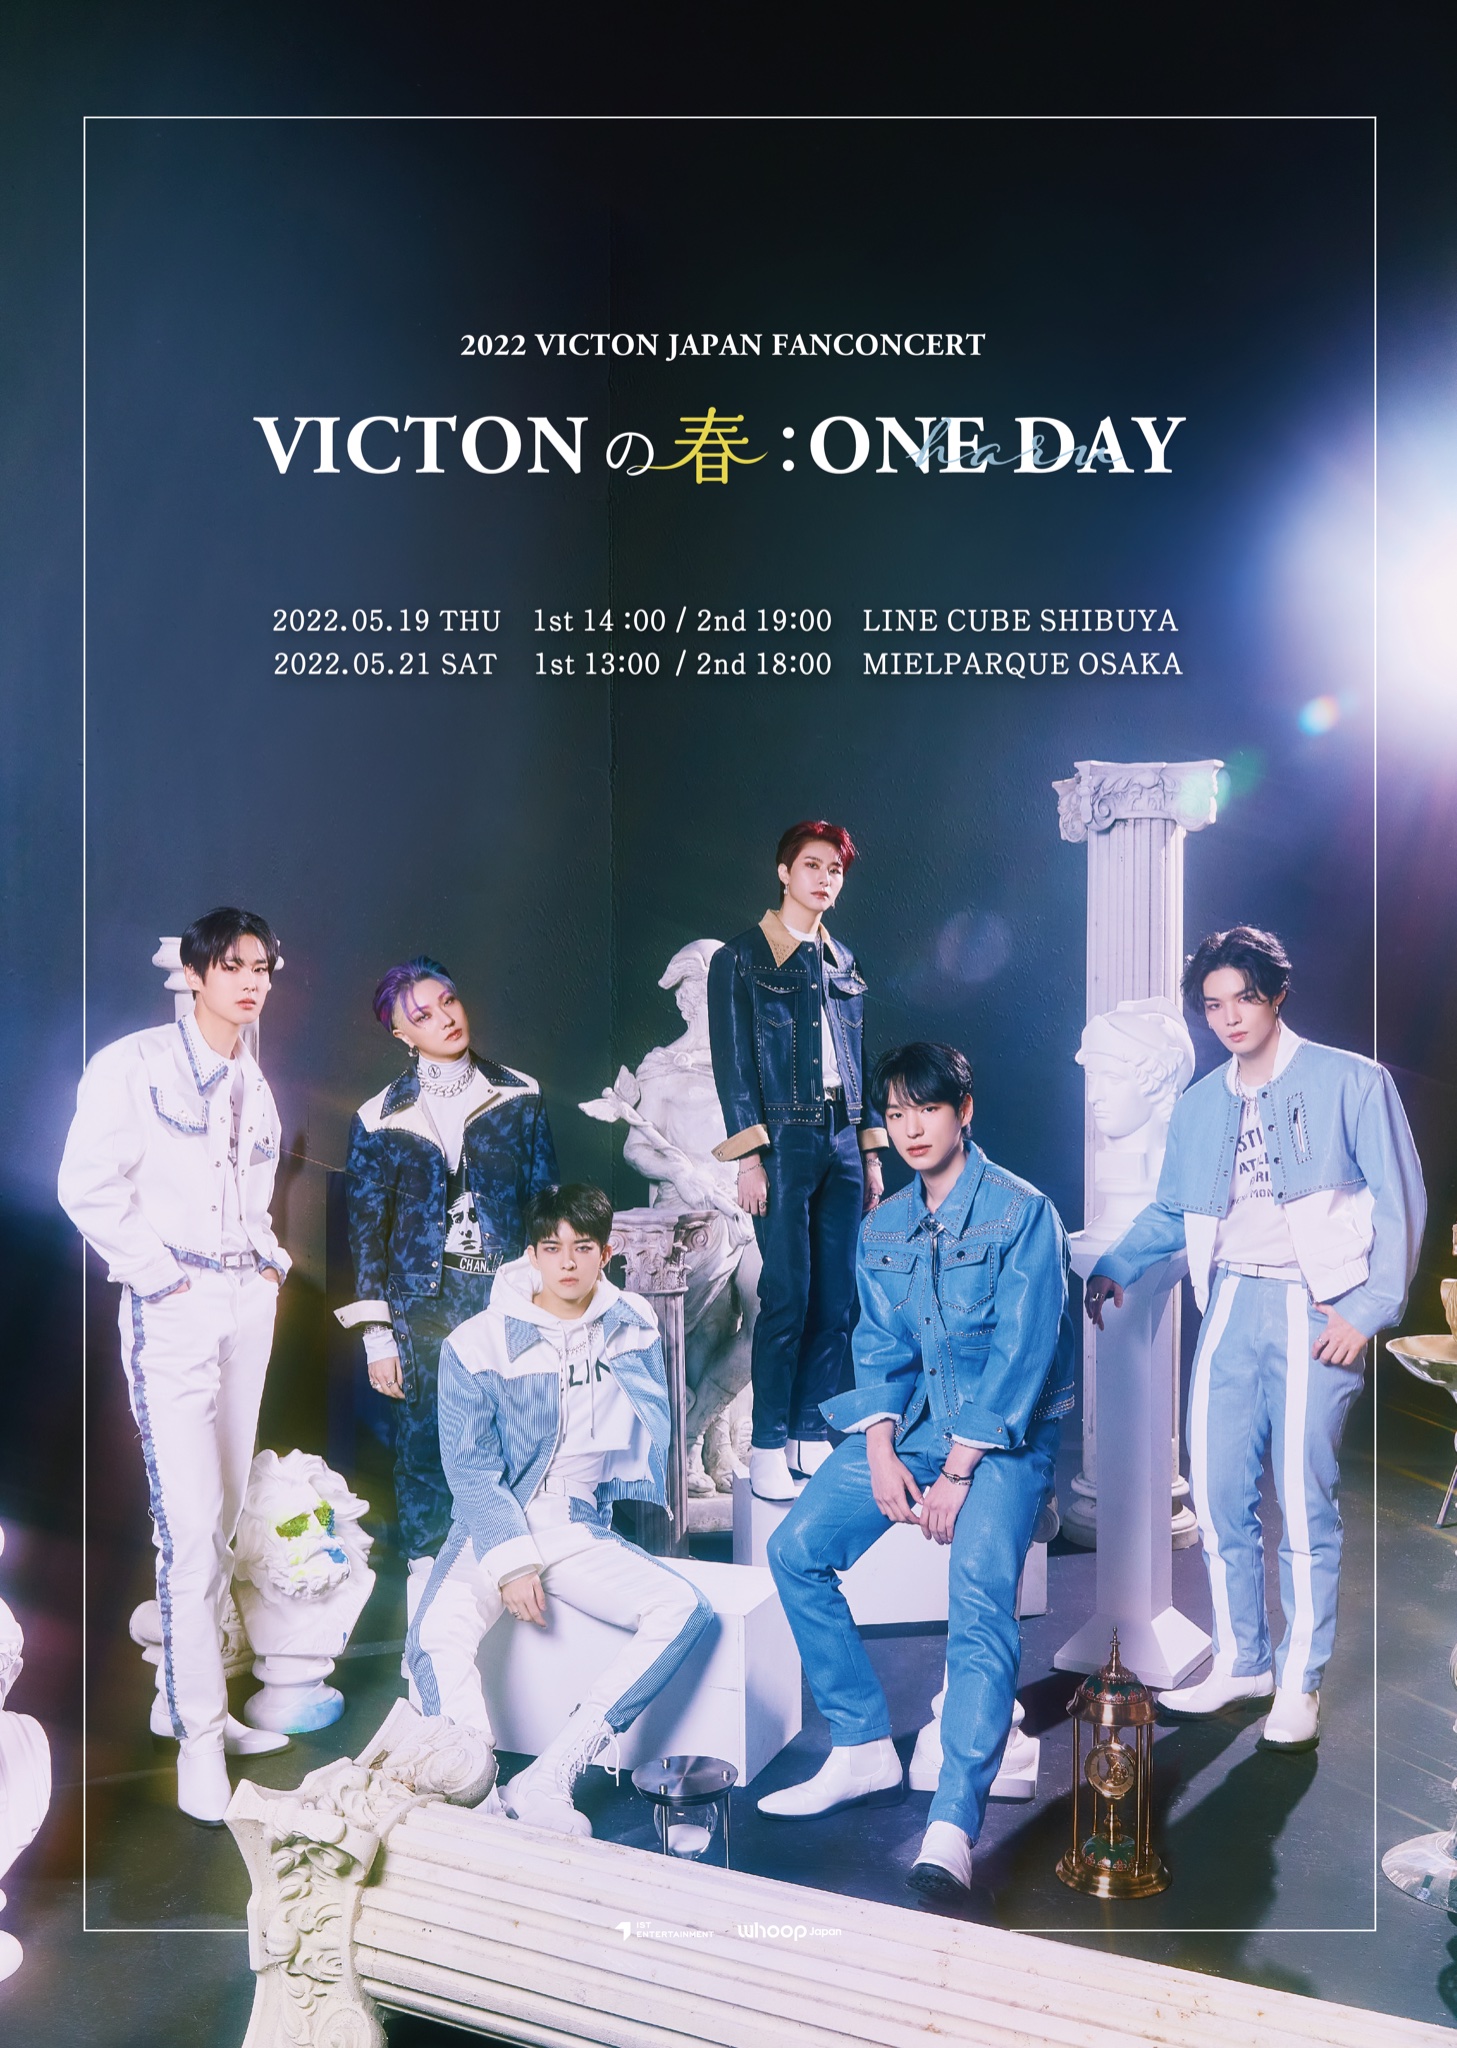 2022 VICTON JAPAN FANCONCERT 'VICTONの春 : ONE DAY' [1部]